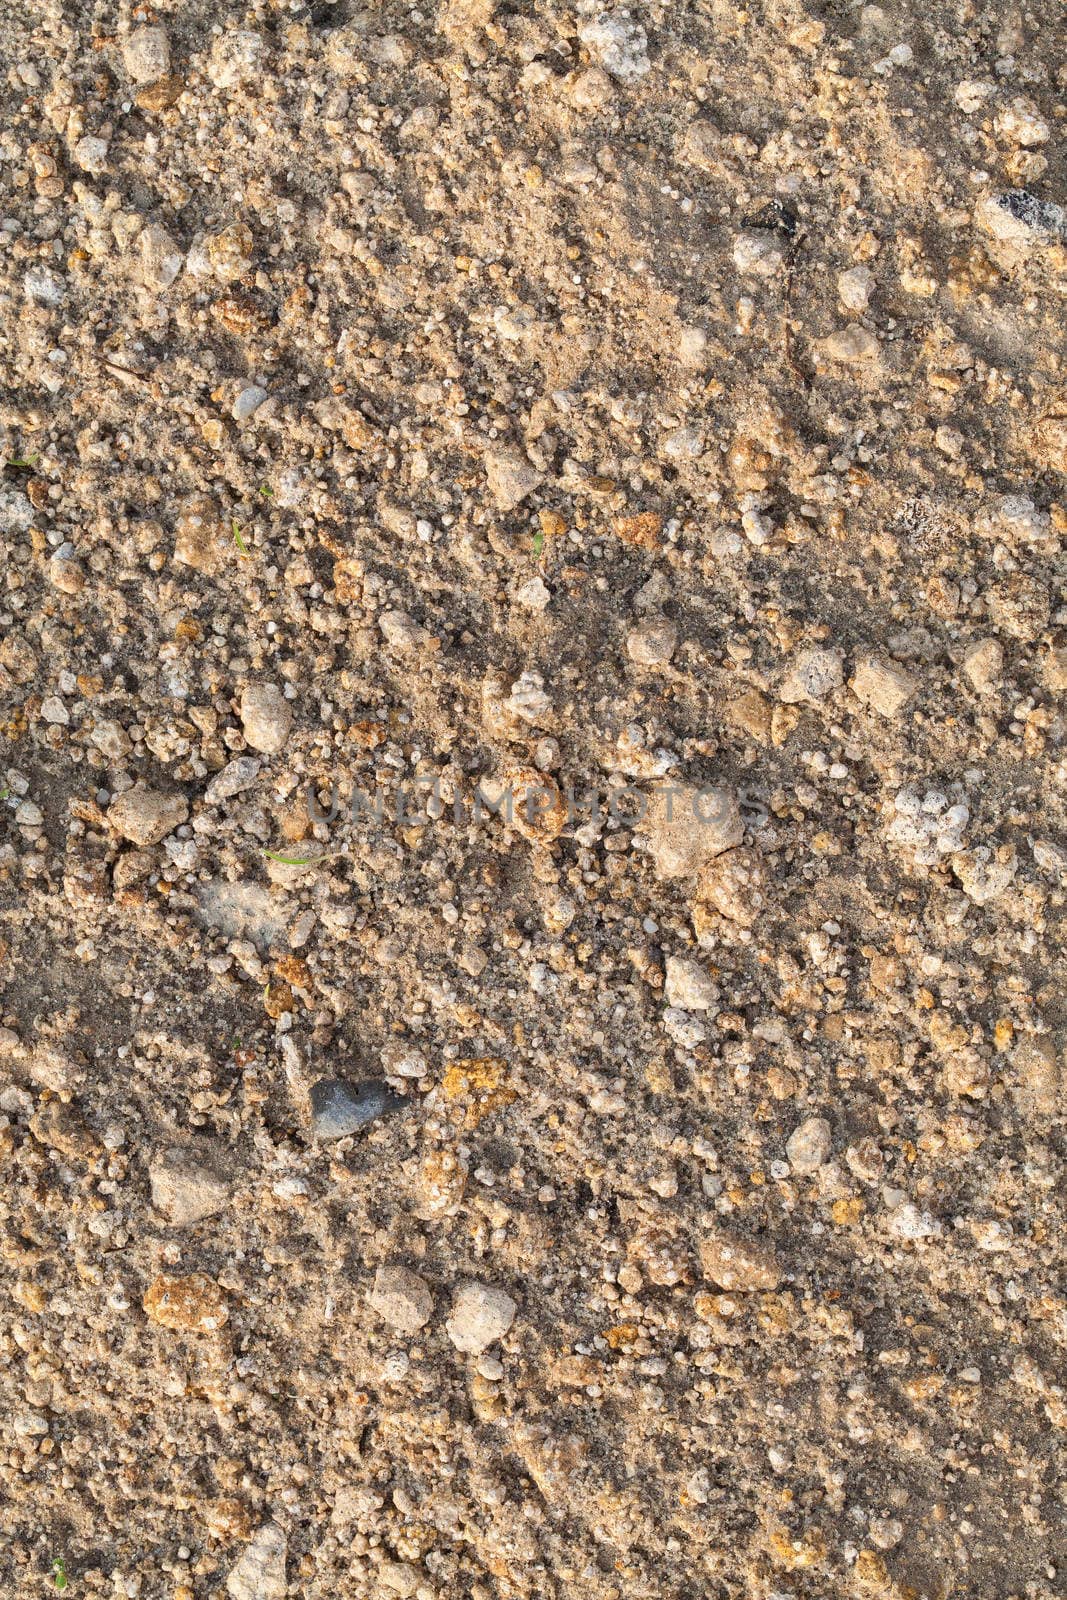 Seamless texture of a sand and soil with stones. Closeup